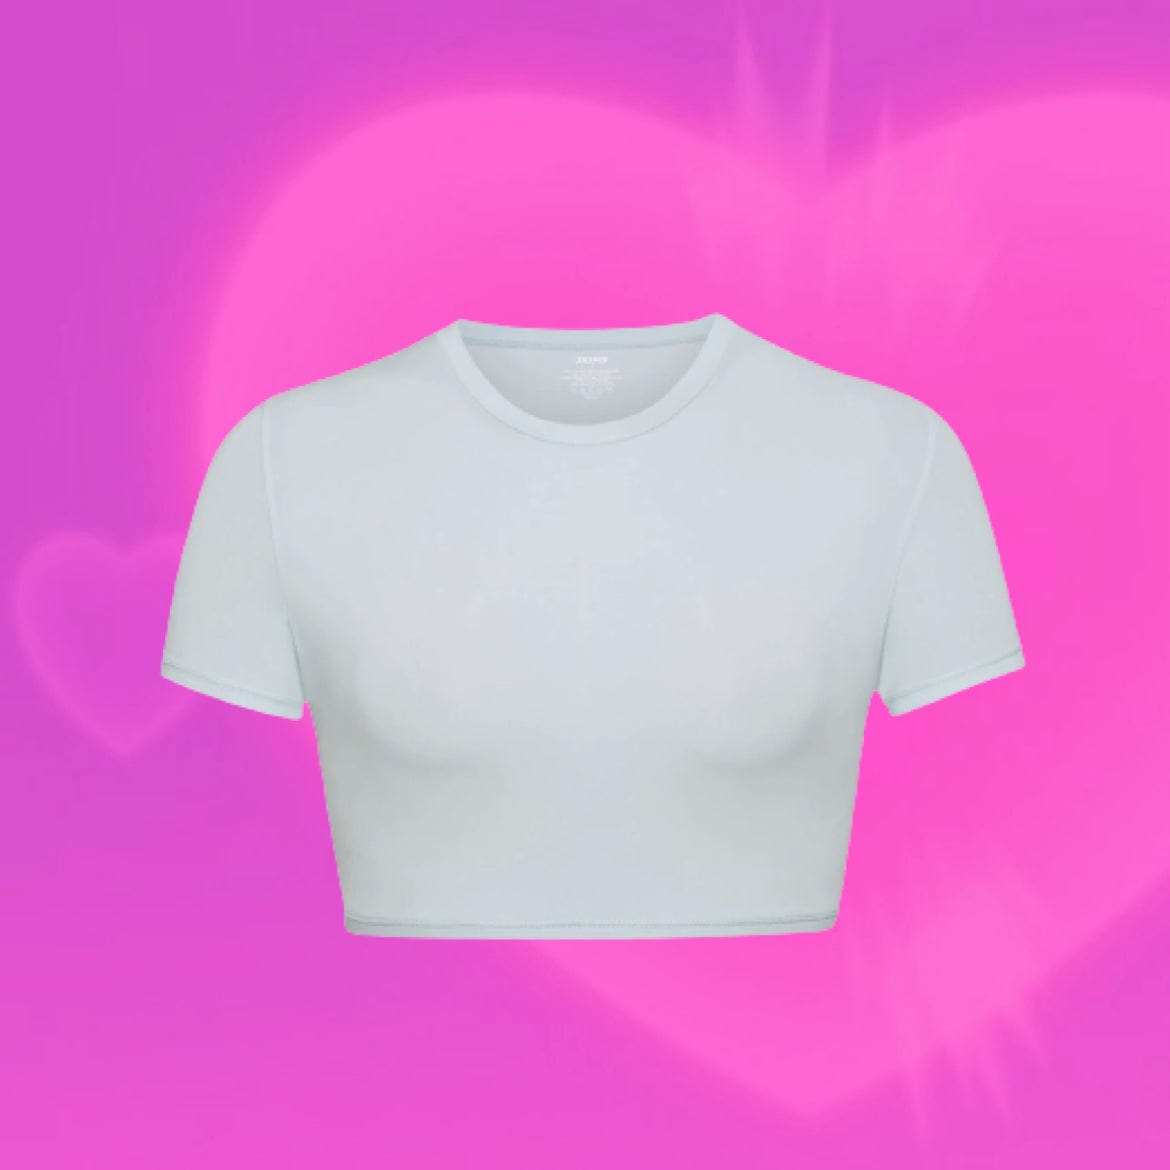 SKIMS super cropped tee in Sky